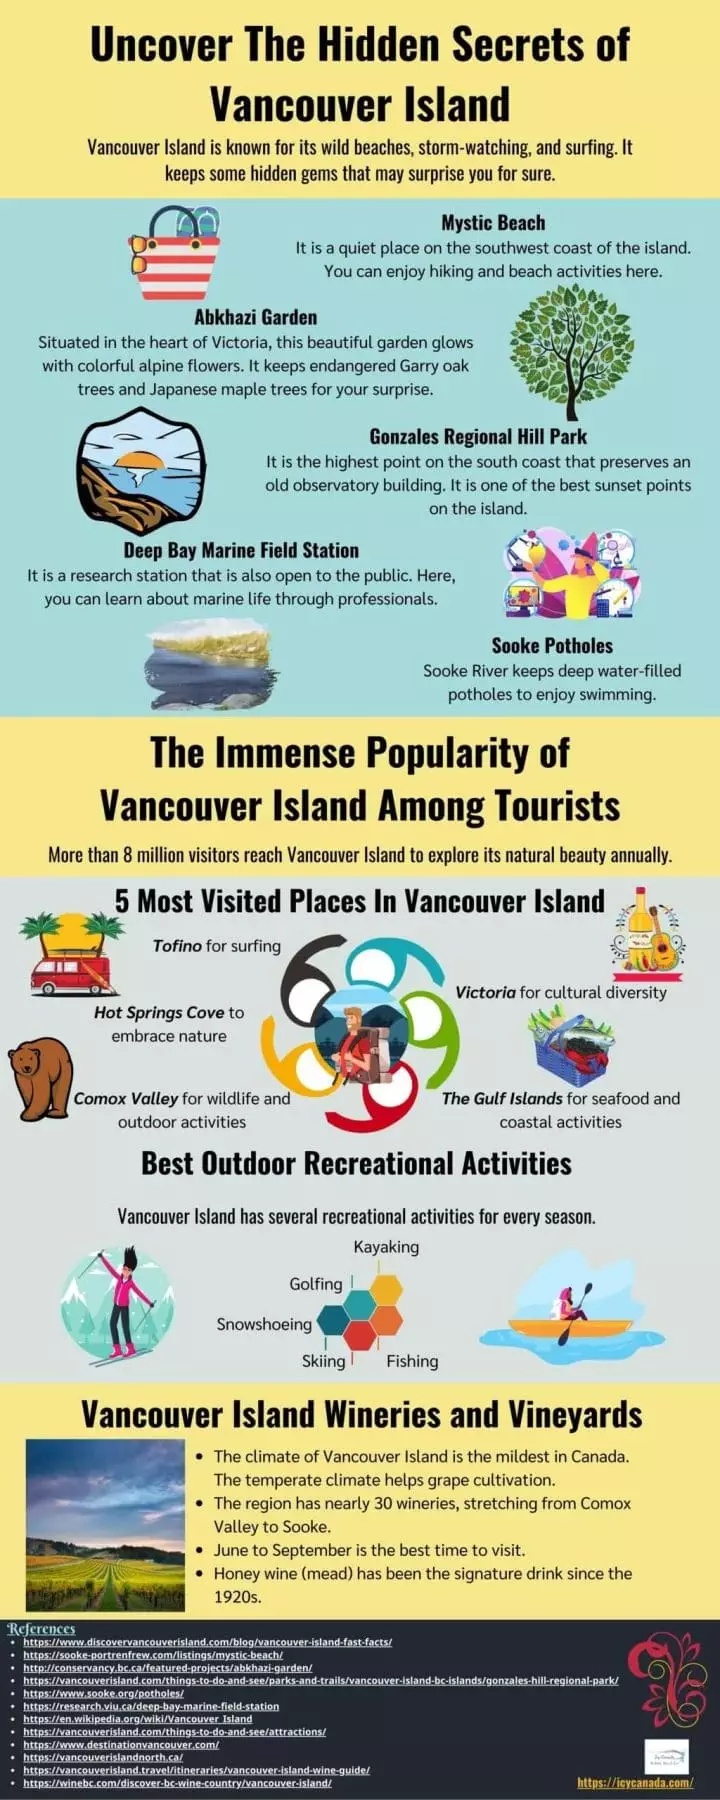 Uncover The Hidden Secrets of Vancouver Island